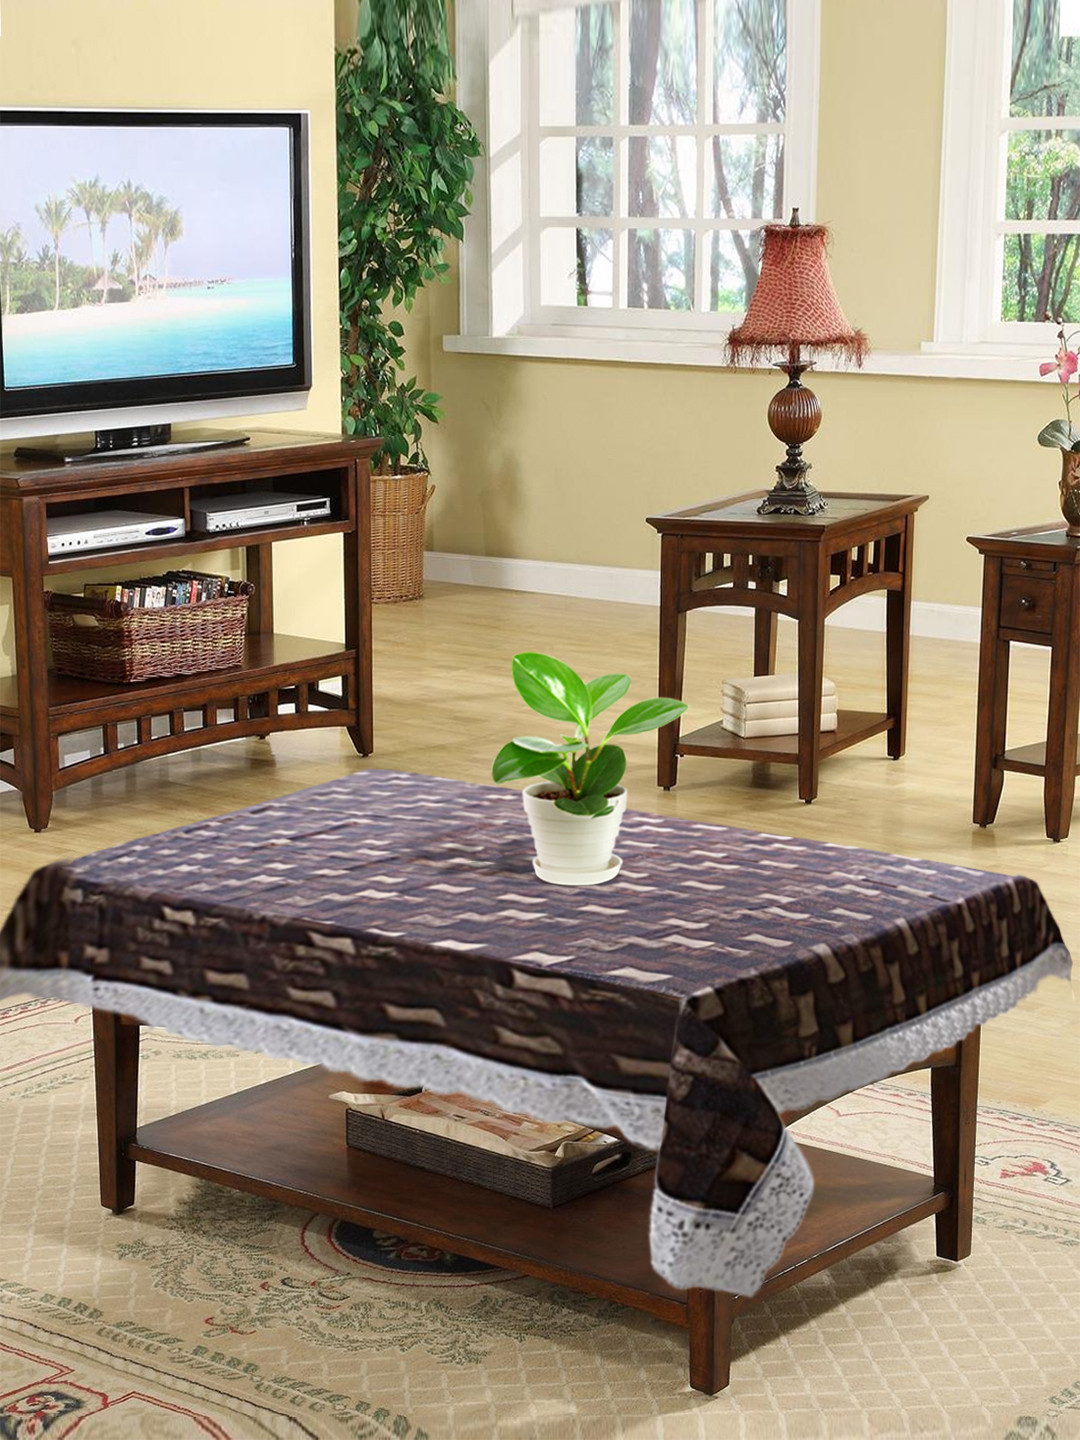 Kuber Industries Bamboo Design PVC 4 Seater Center Table Cover 40